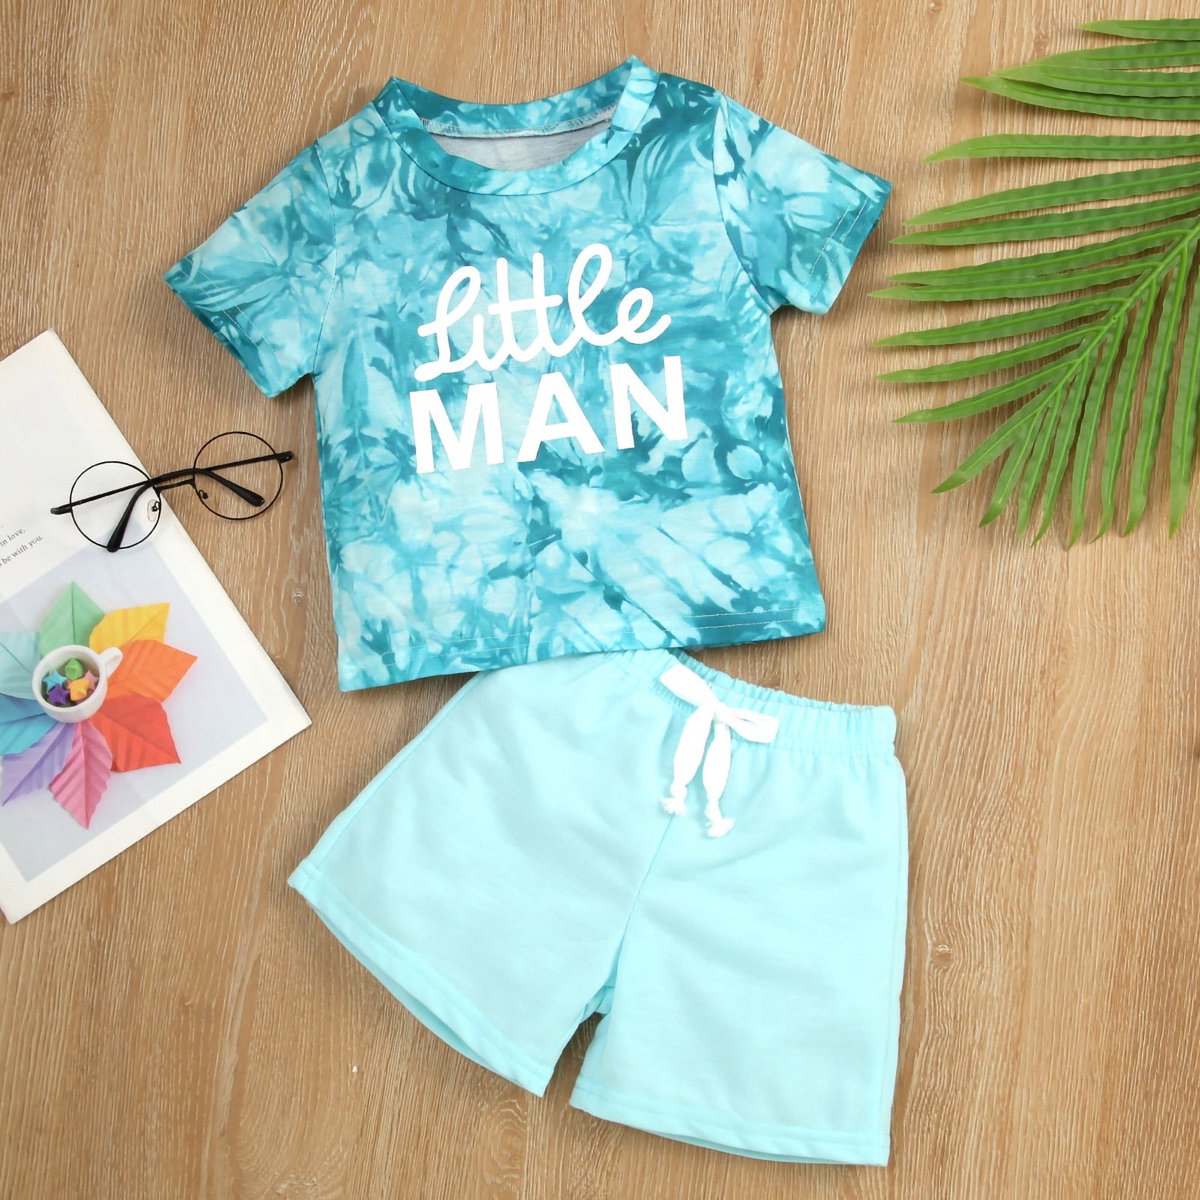 Stylish and comfy 🩵 

your little guy will be looking fly in our Little Man tie dye tee and shorts! 

Perfect for a beach day or a playground adventure!

Get it now from our website, link in bio 

#Star #BabyBoutique #BabyFashion #ShopSmall #ChildrensBoutique #BabyLove